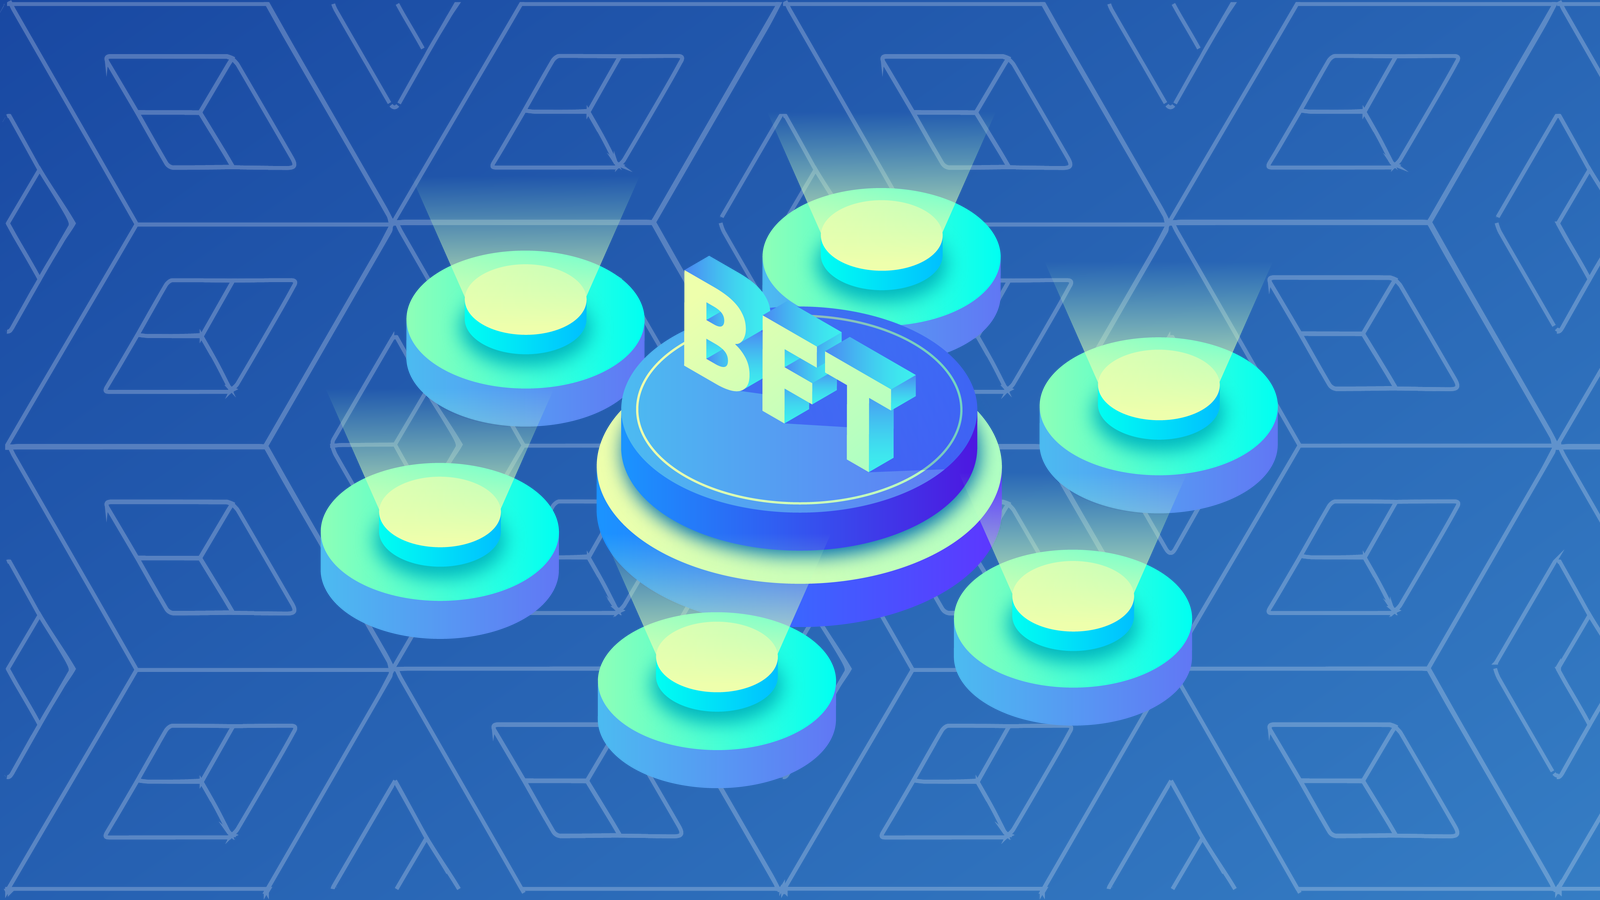 Byzantine Fault Tolerance (BFT) is one of the fundamental properties of reliable blockchain rules or protocols